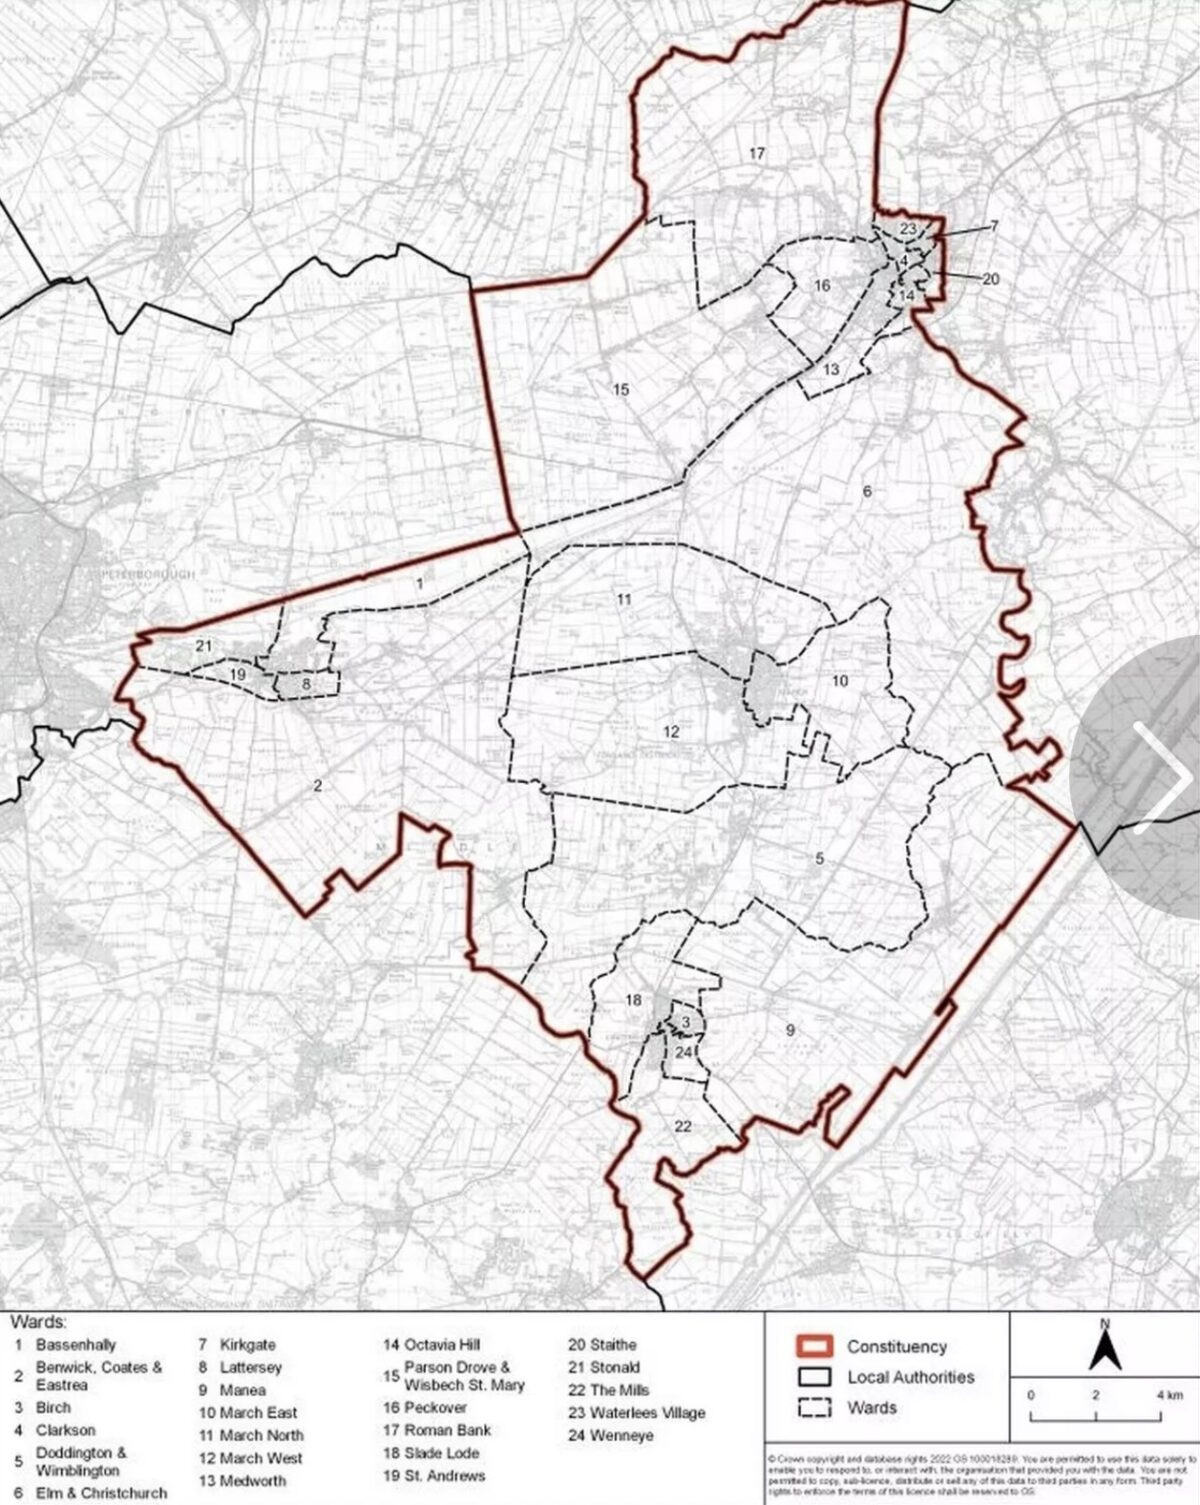 New constituency boundary map